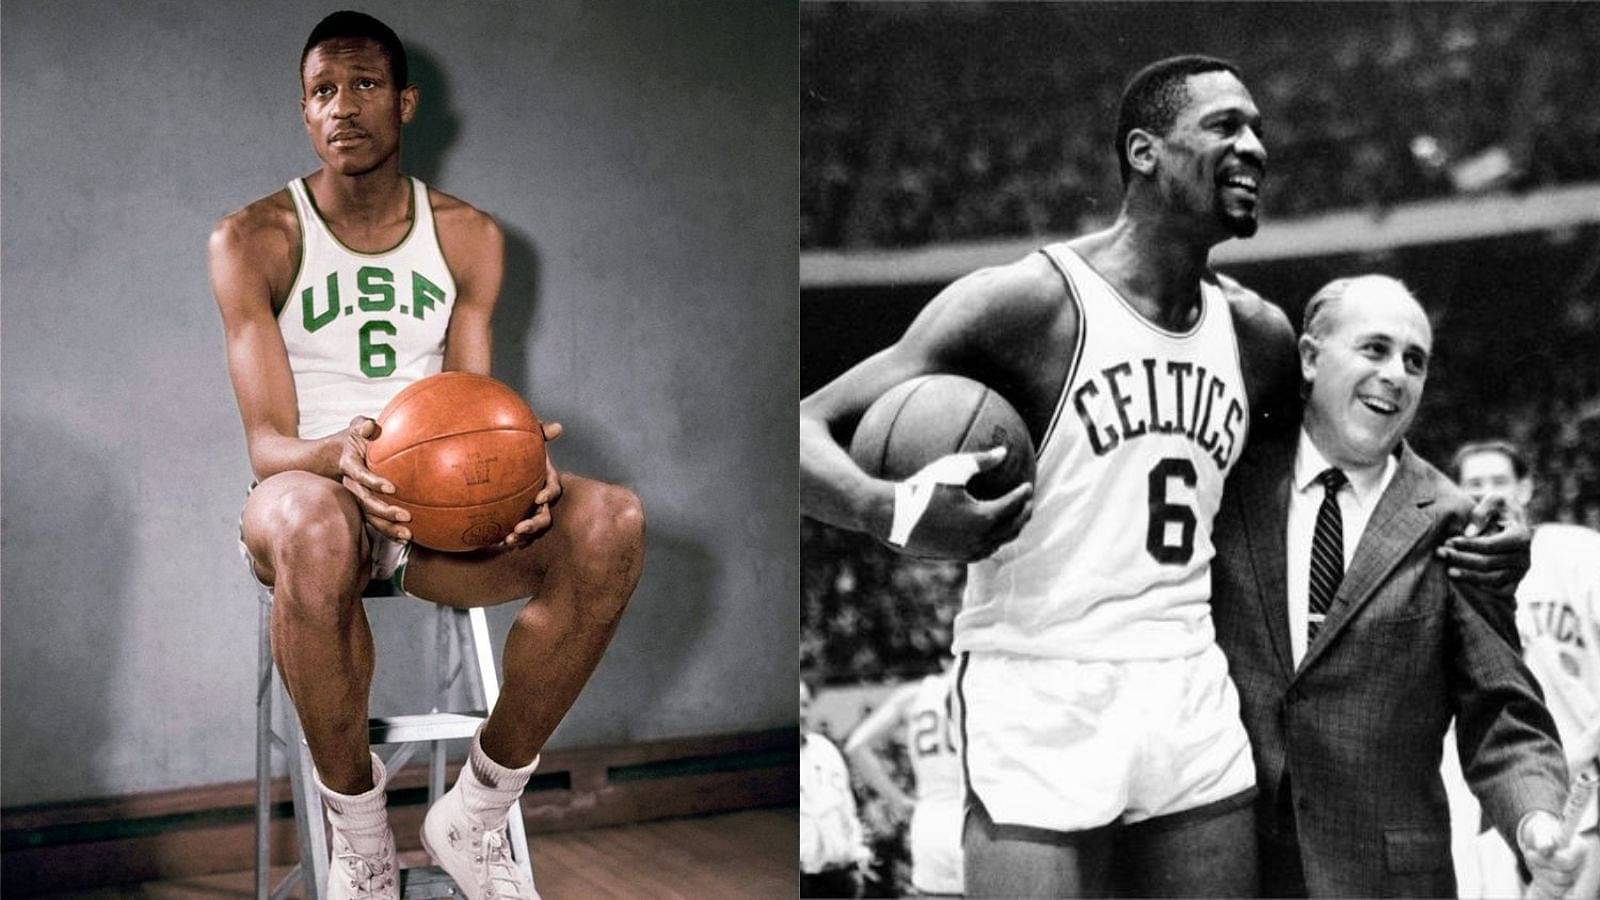 A 6ft 10", Bill Russell was an athletically gifted beast of nature who could jump over an NBA player to dunk the basketball from the free throw line